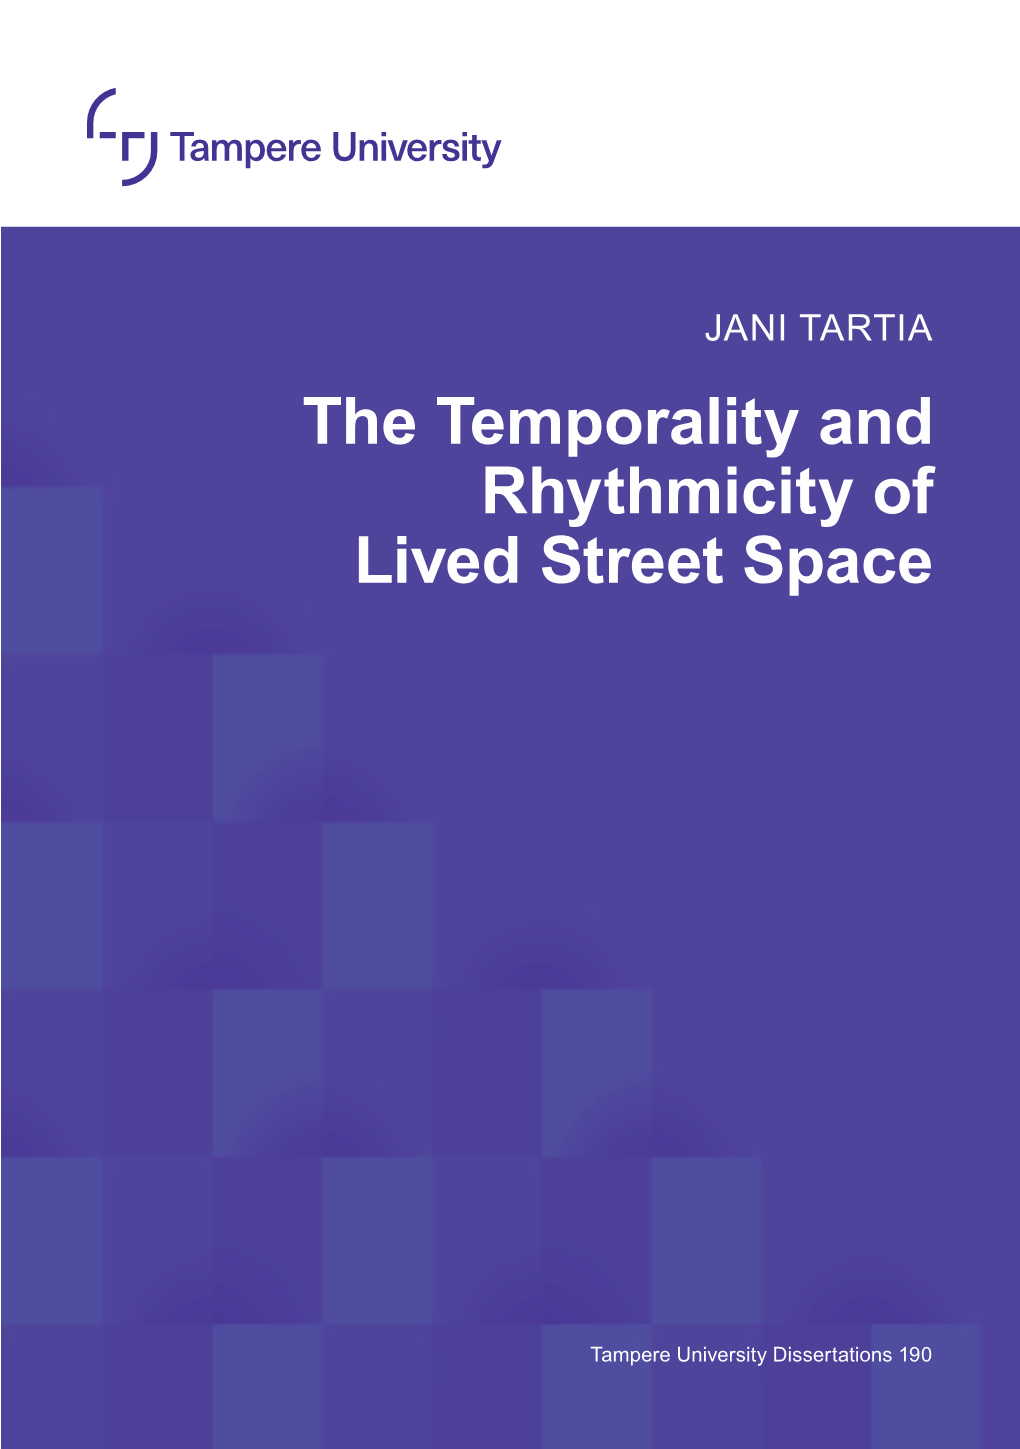 The Temporality and Rhythmicity of Lived Street Space